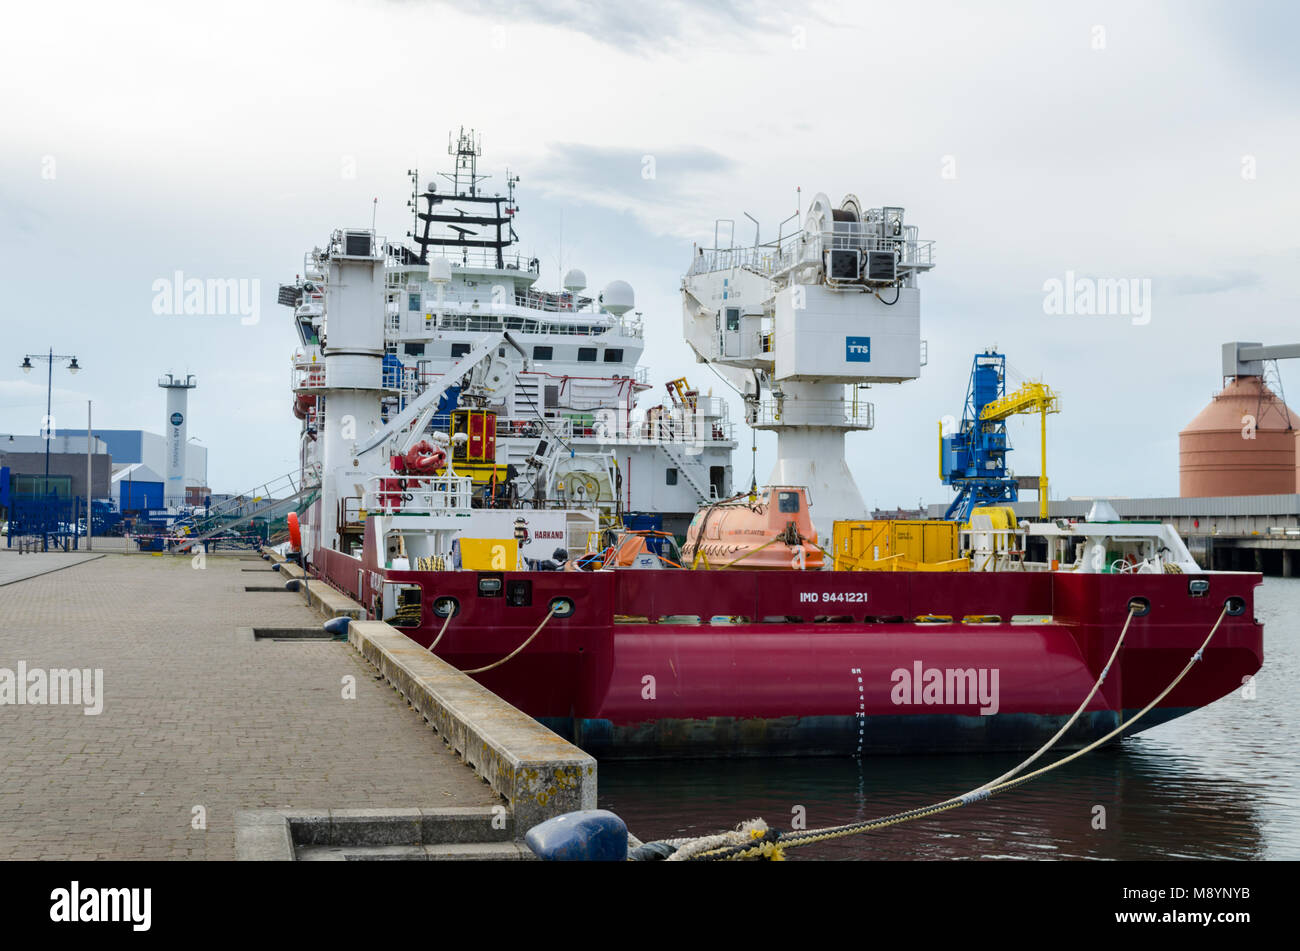 The 'Nor Atlantis' Offshore Supply Ship docked at the Port of Blyth, Blyth, Northumberland Stock Photo